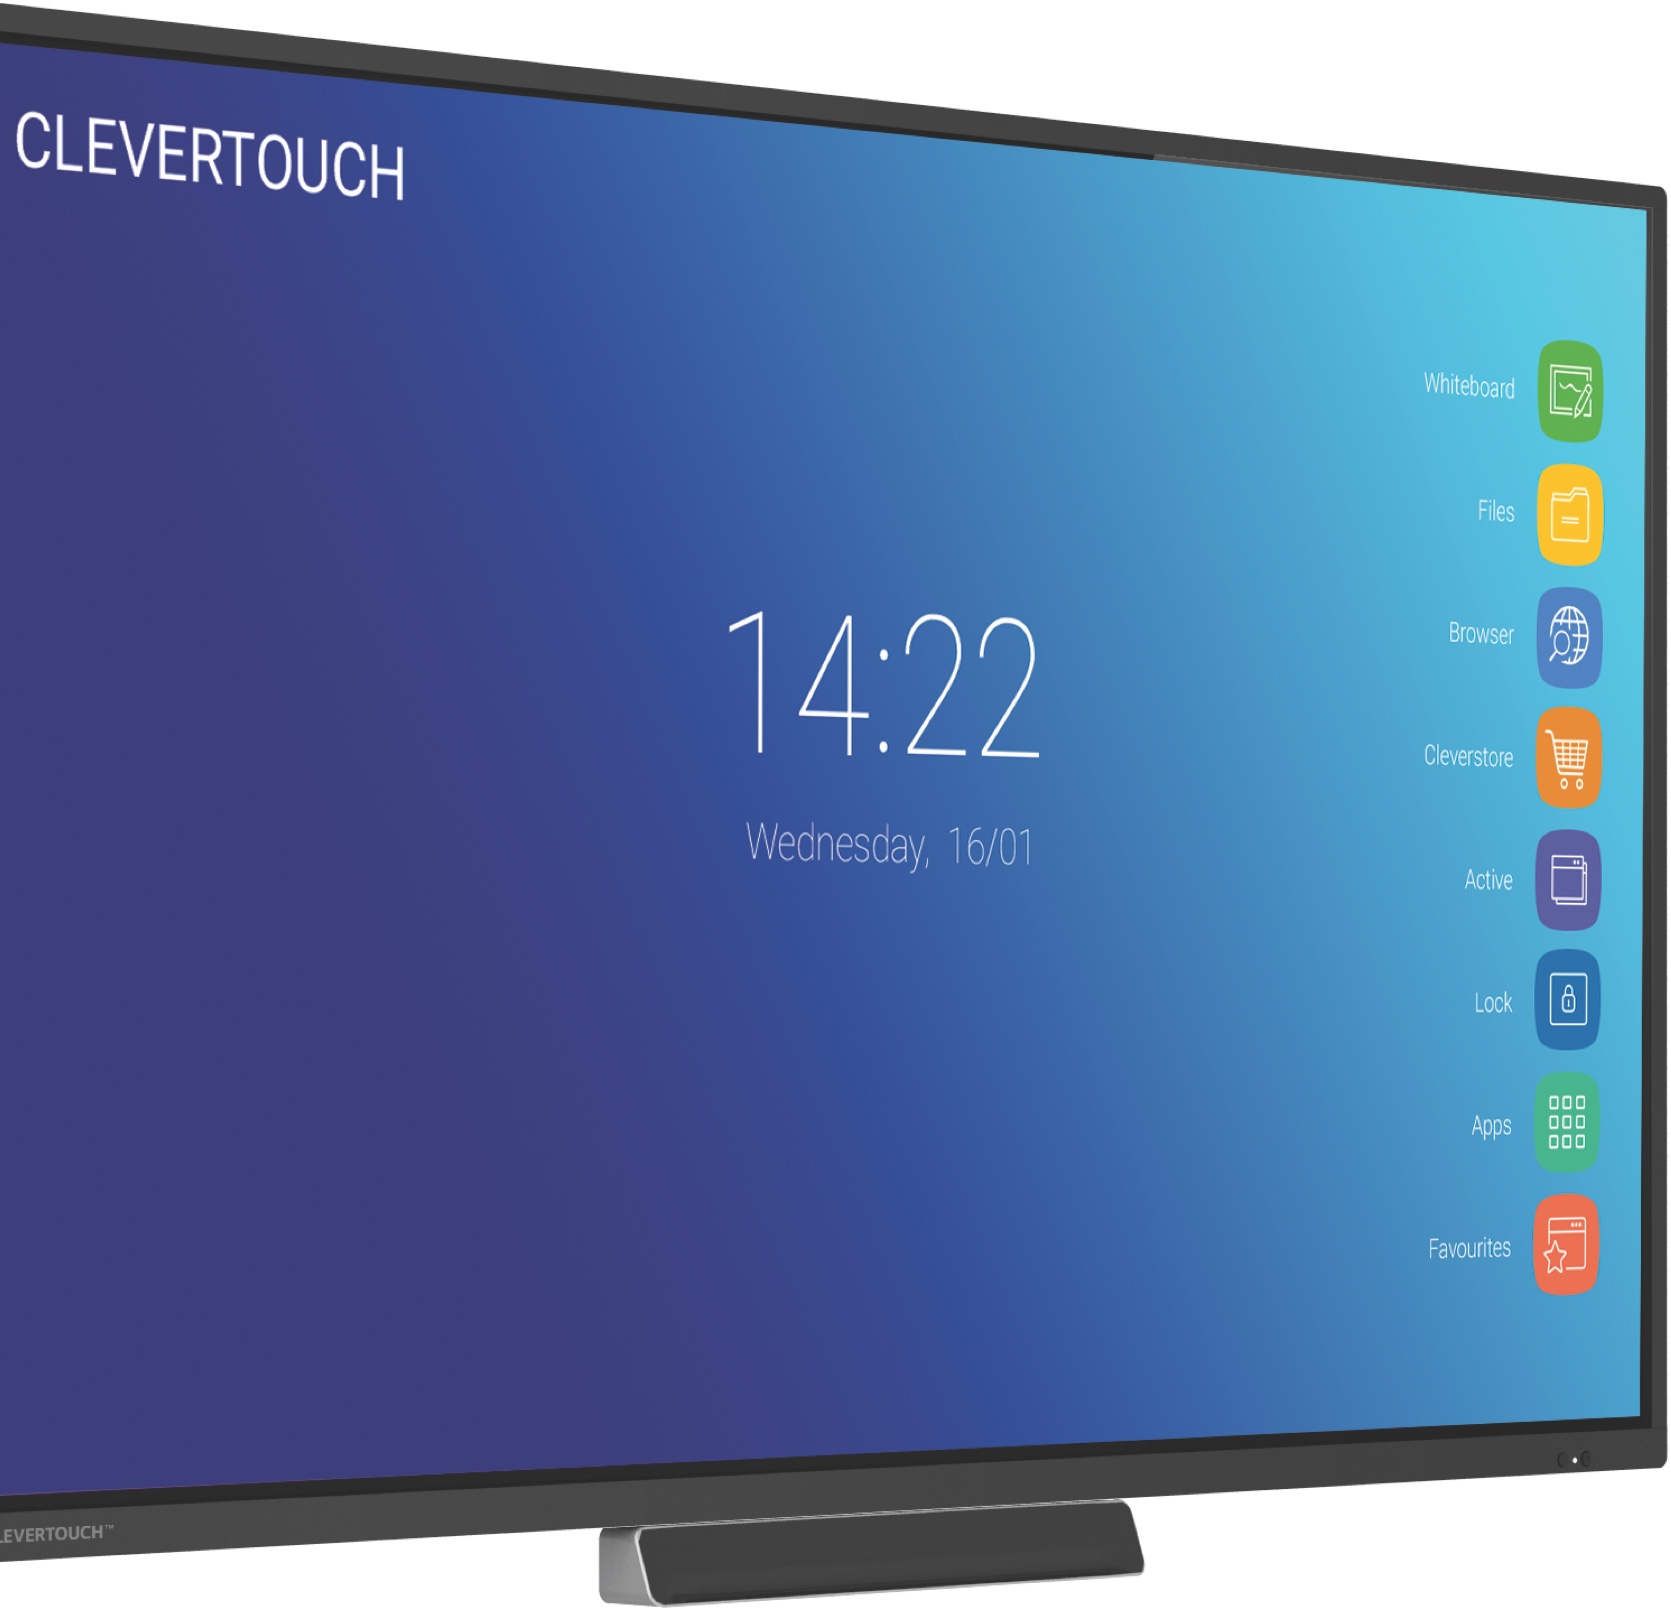 Clevertouch Impact Plus